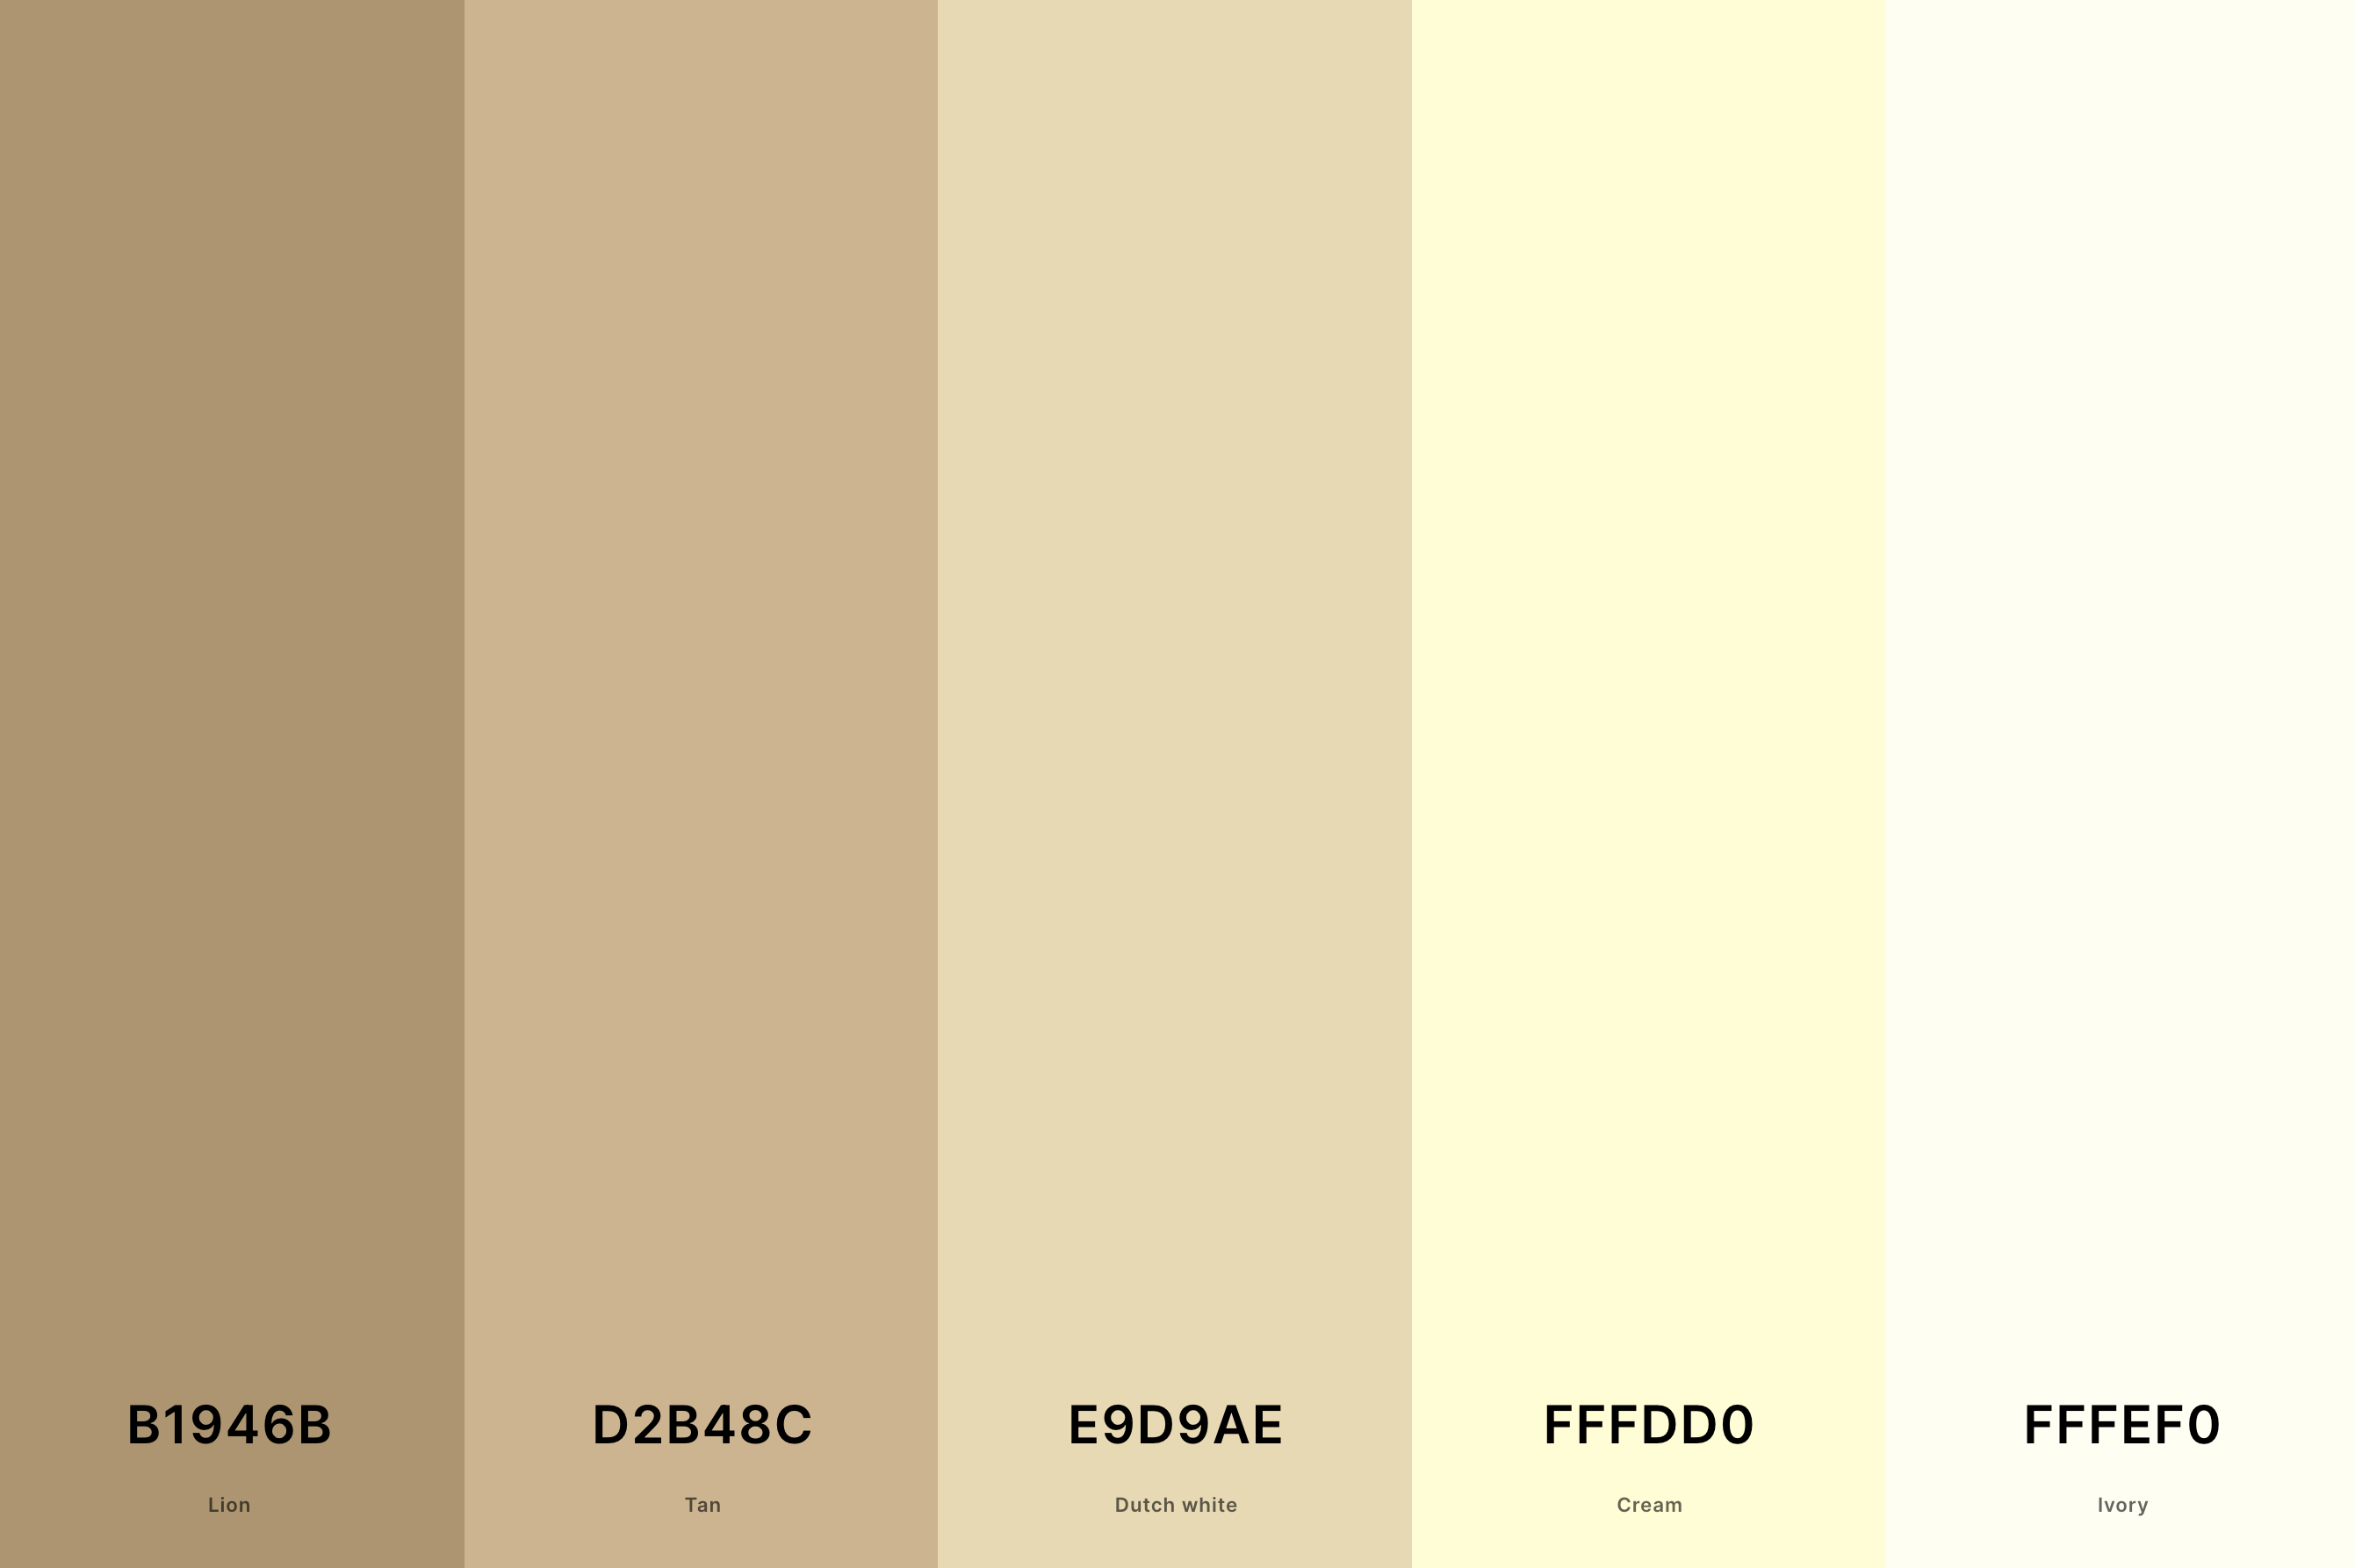 21. Tan And Cream Color Palette Color Palette with Lion (Hex #B1946B) + Tan (Hex #D2B48C) + Dutch White (Hex #E9D9AE) + Cream (Hex #FFFDD0) + Ivory (Hex #FFFEF0) Color Palette with Hex Codes